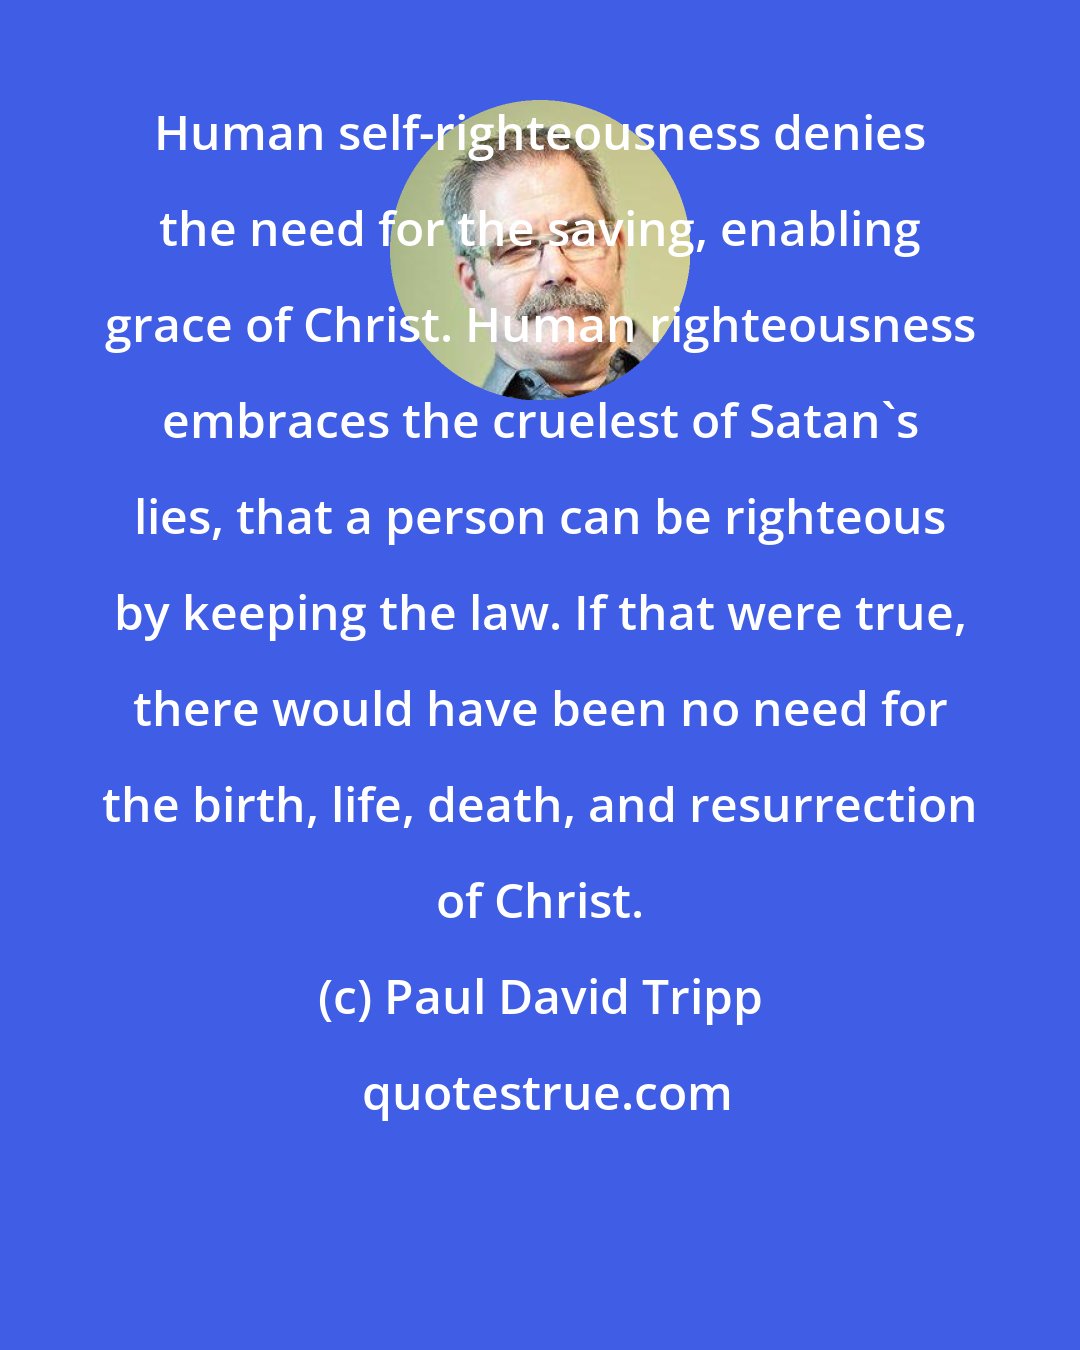 Paul David Tripp: Human self-righteousness denies the need for the saving, enabling grace of Christ. Human righteousness embraces the cruelest of Satan's lies, that a person can be righteous by keeping the law. If that were true, there would have been no need for the birth, life, death, and resurrection of Christ.